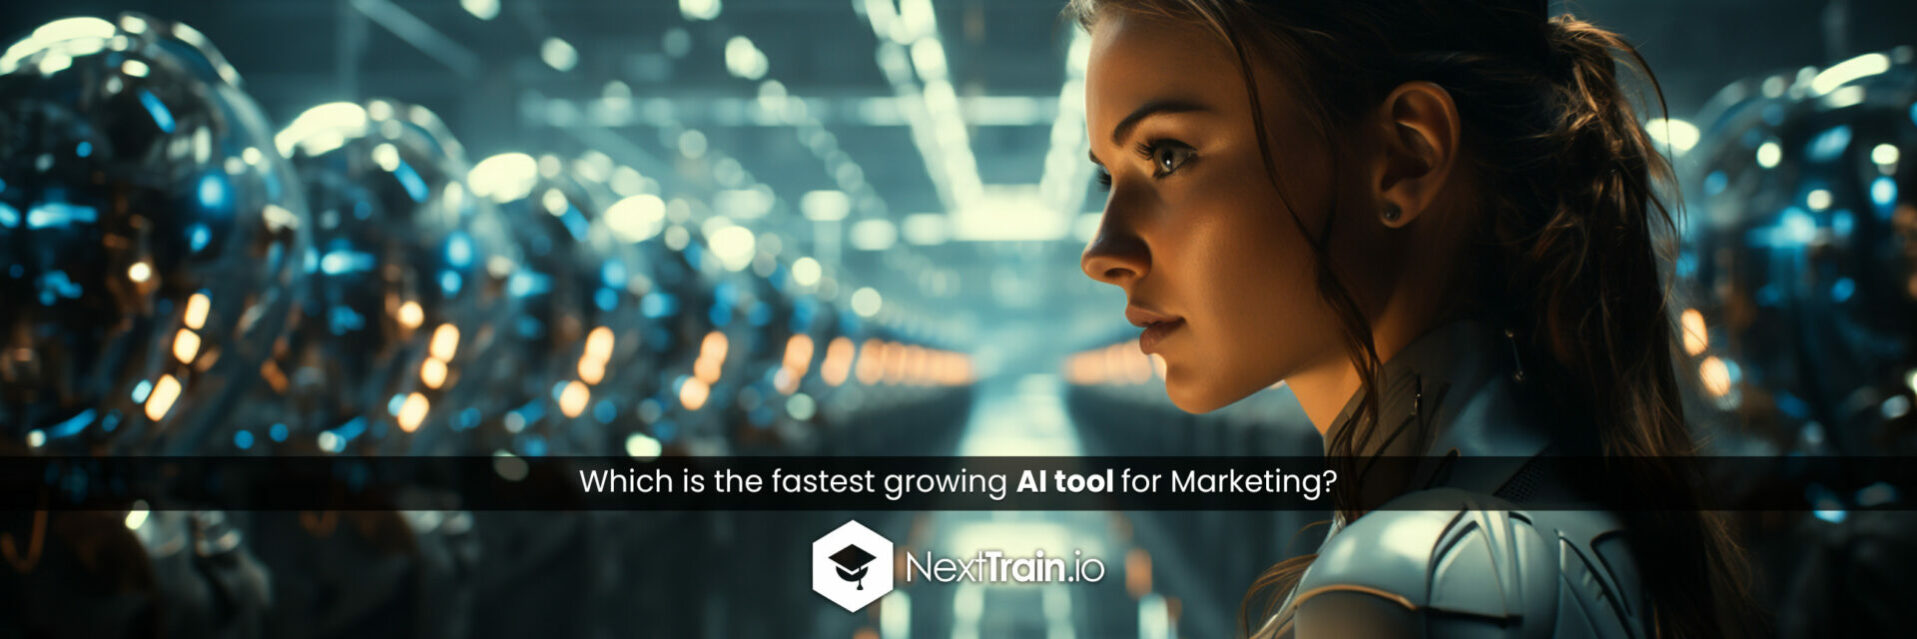 Which is the fastest growing AI tool for Marketing?